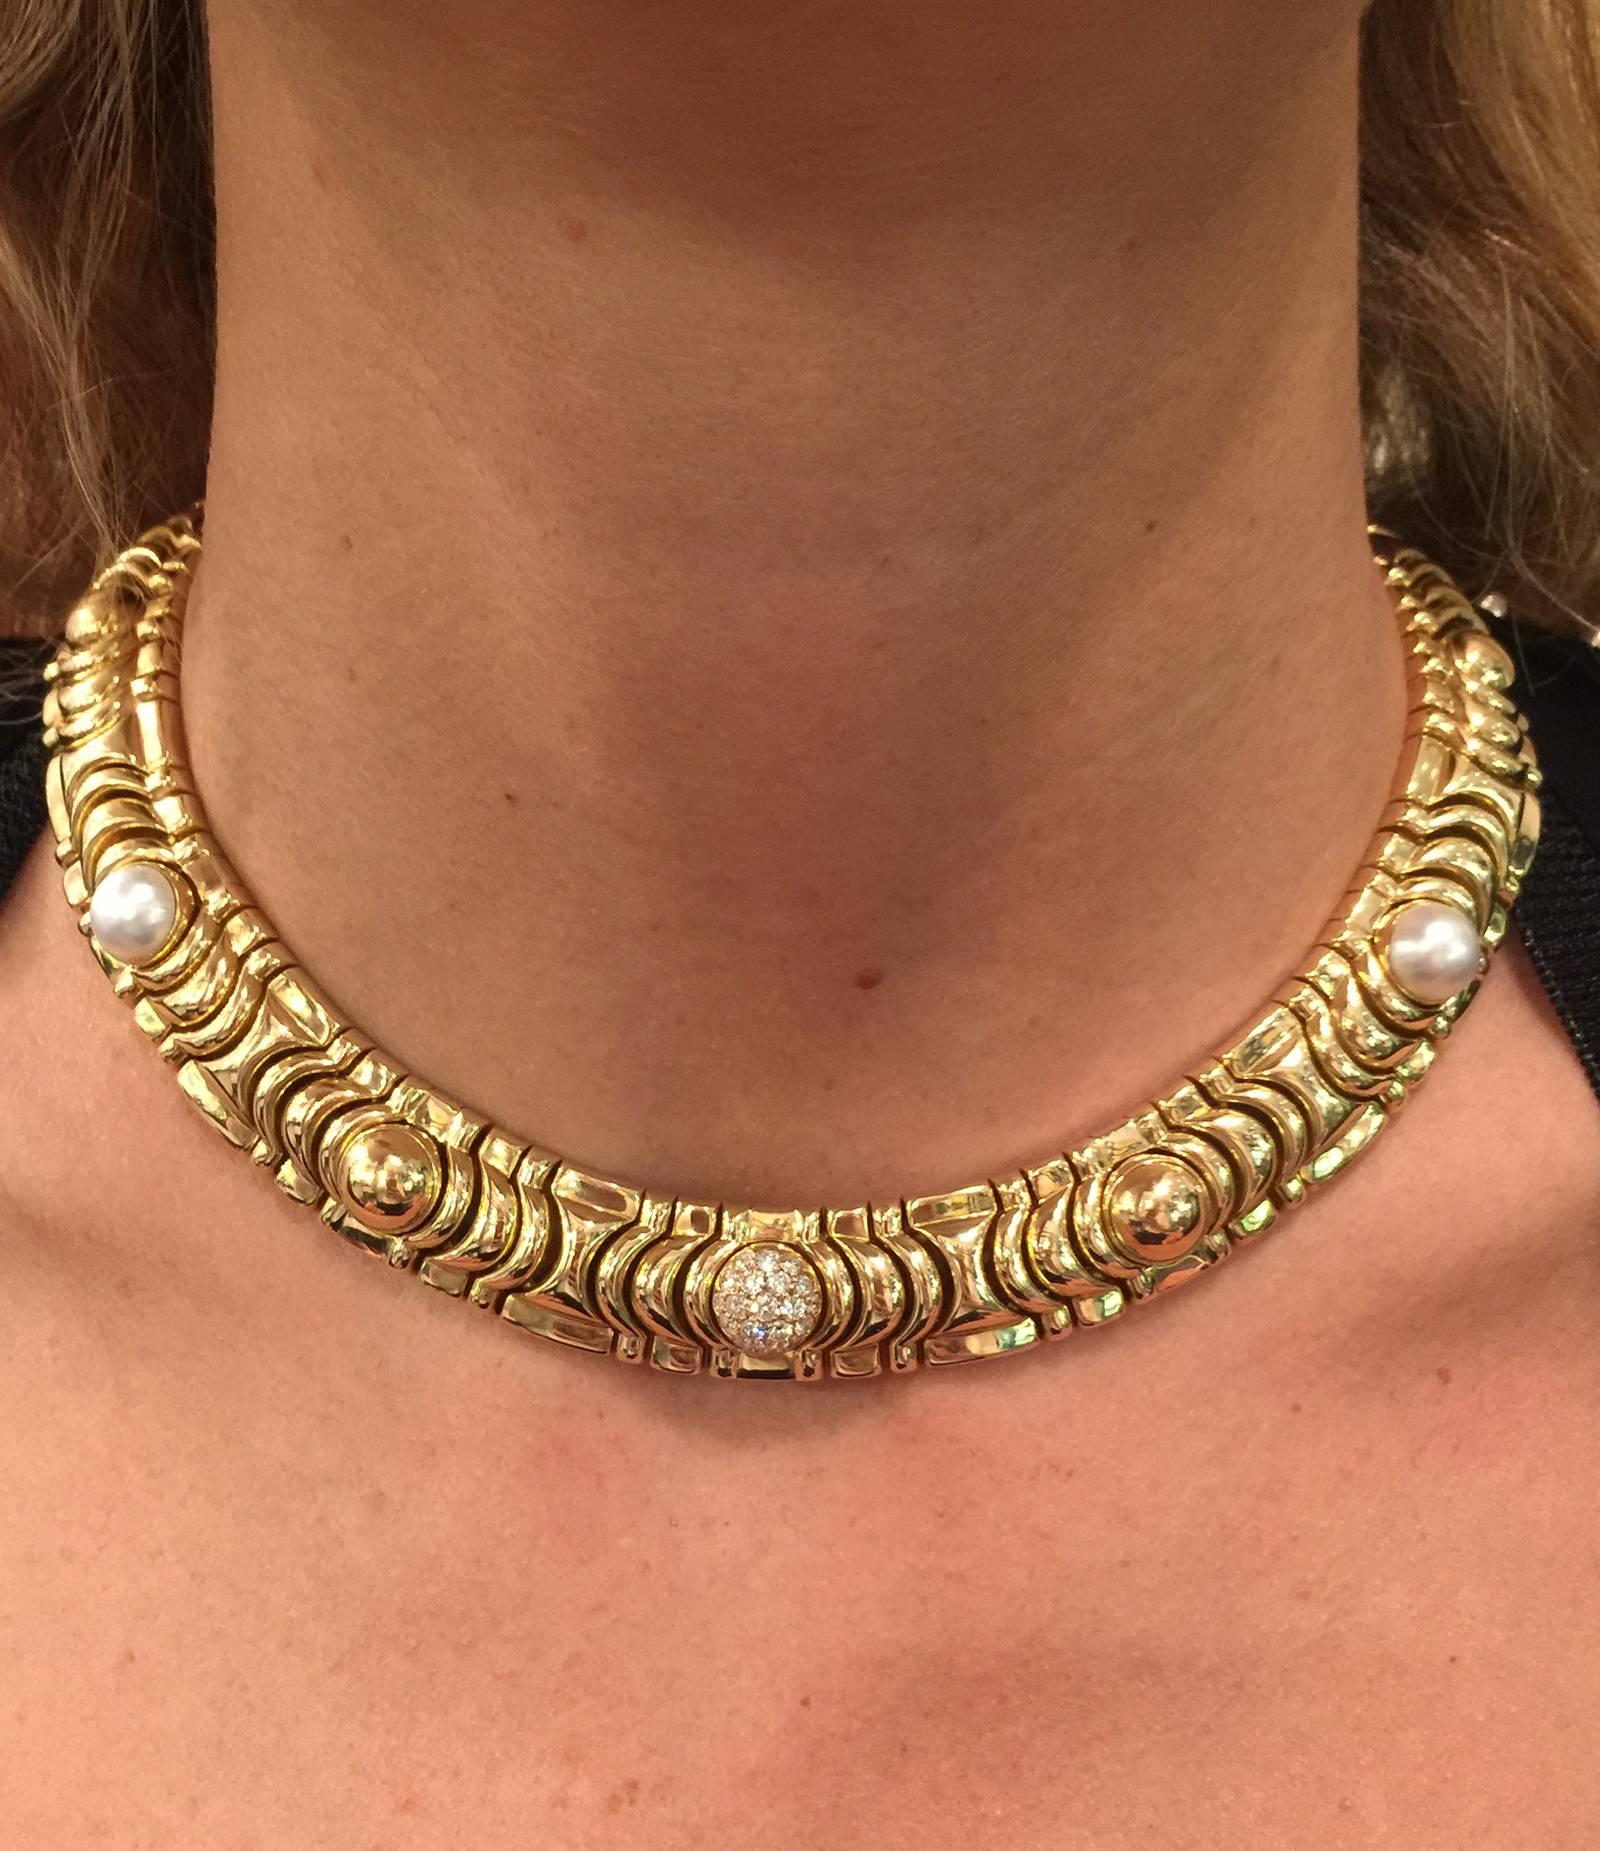 Women's 1990s Piaget Gold Necklace Enhanced with 19 Half Decorative Beads